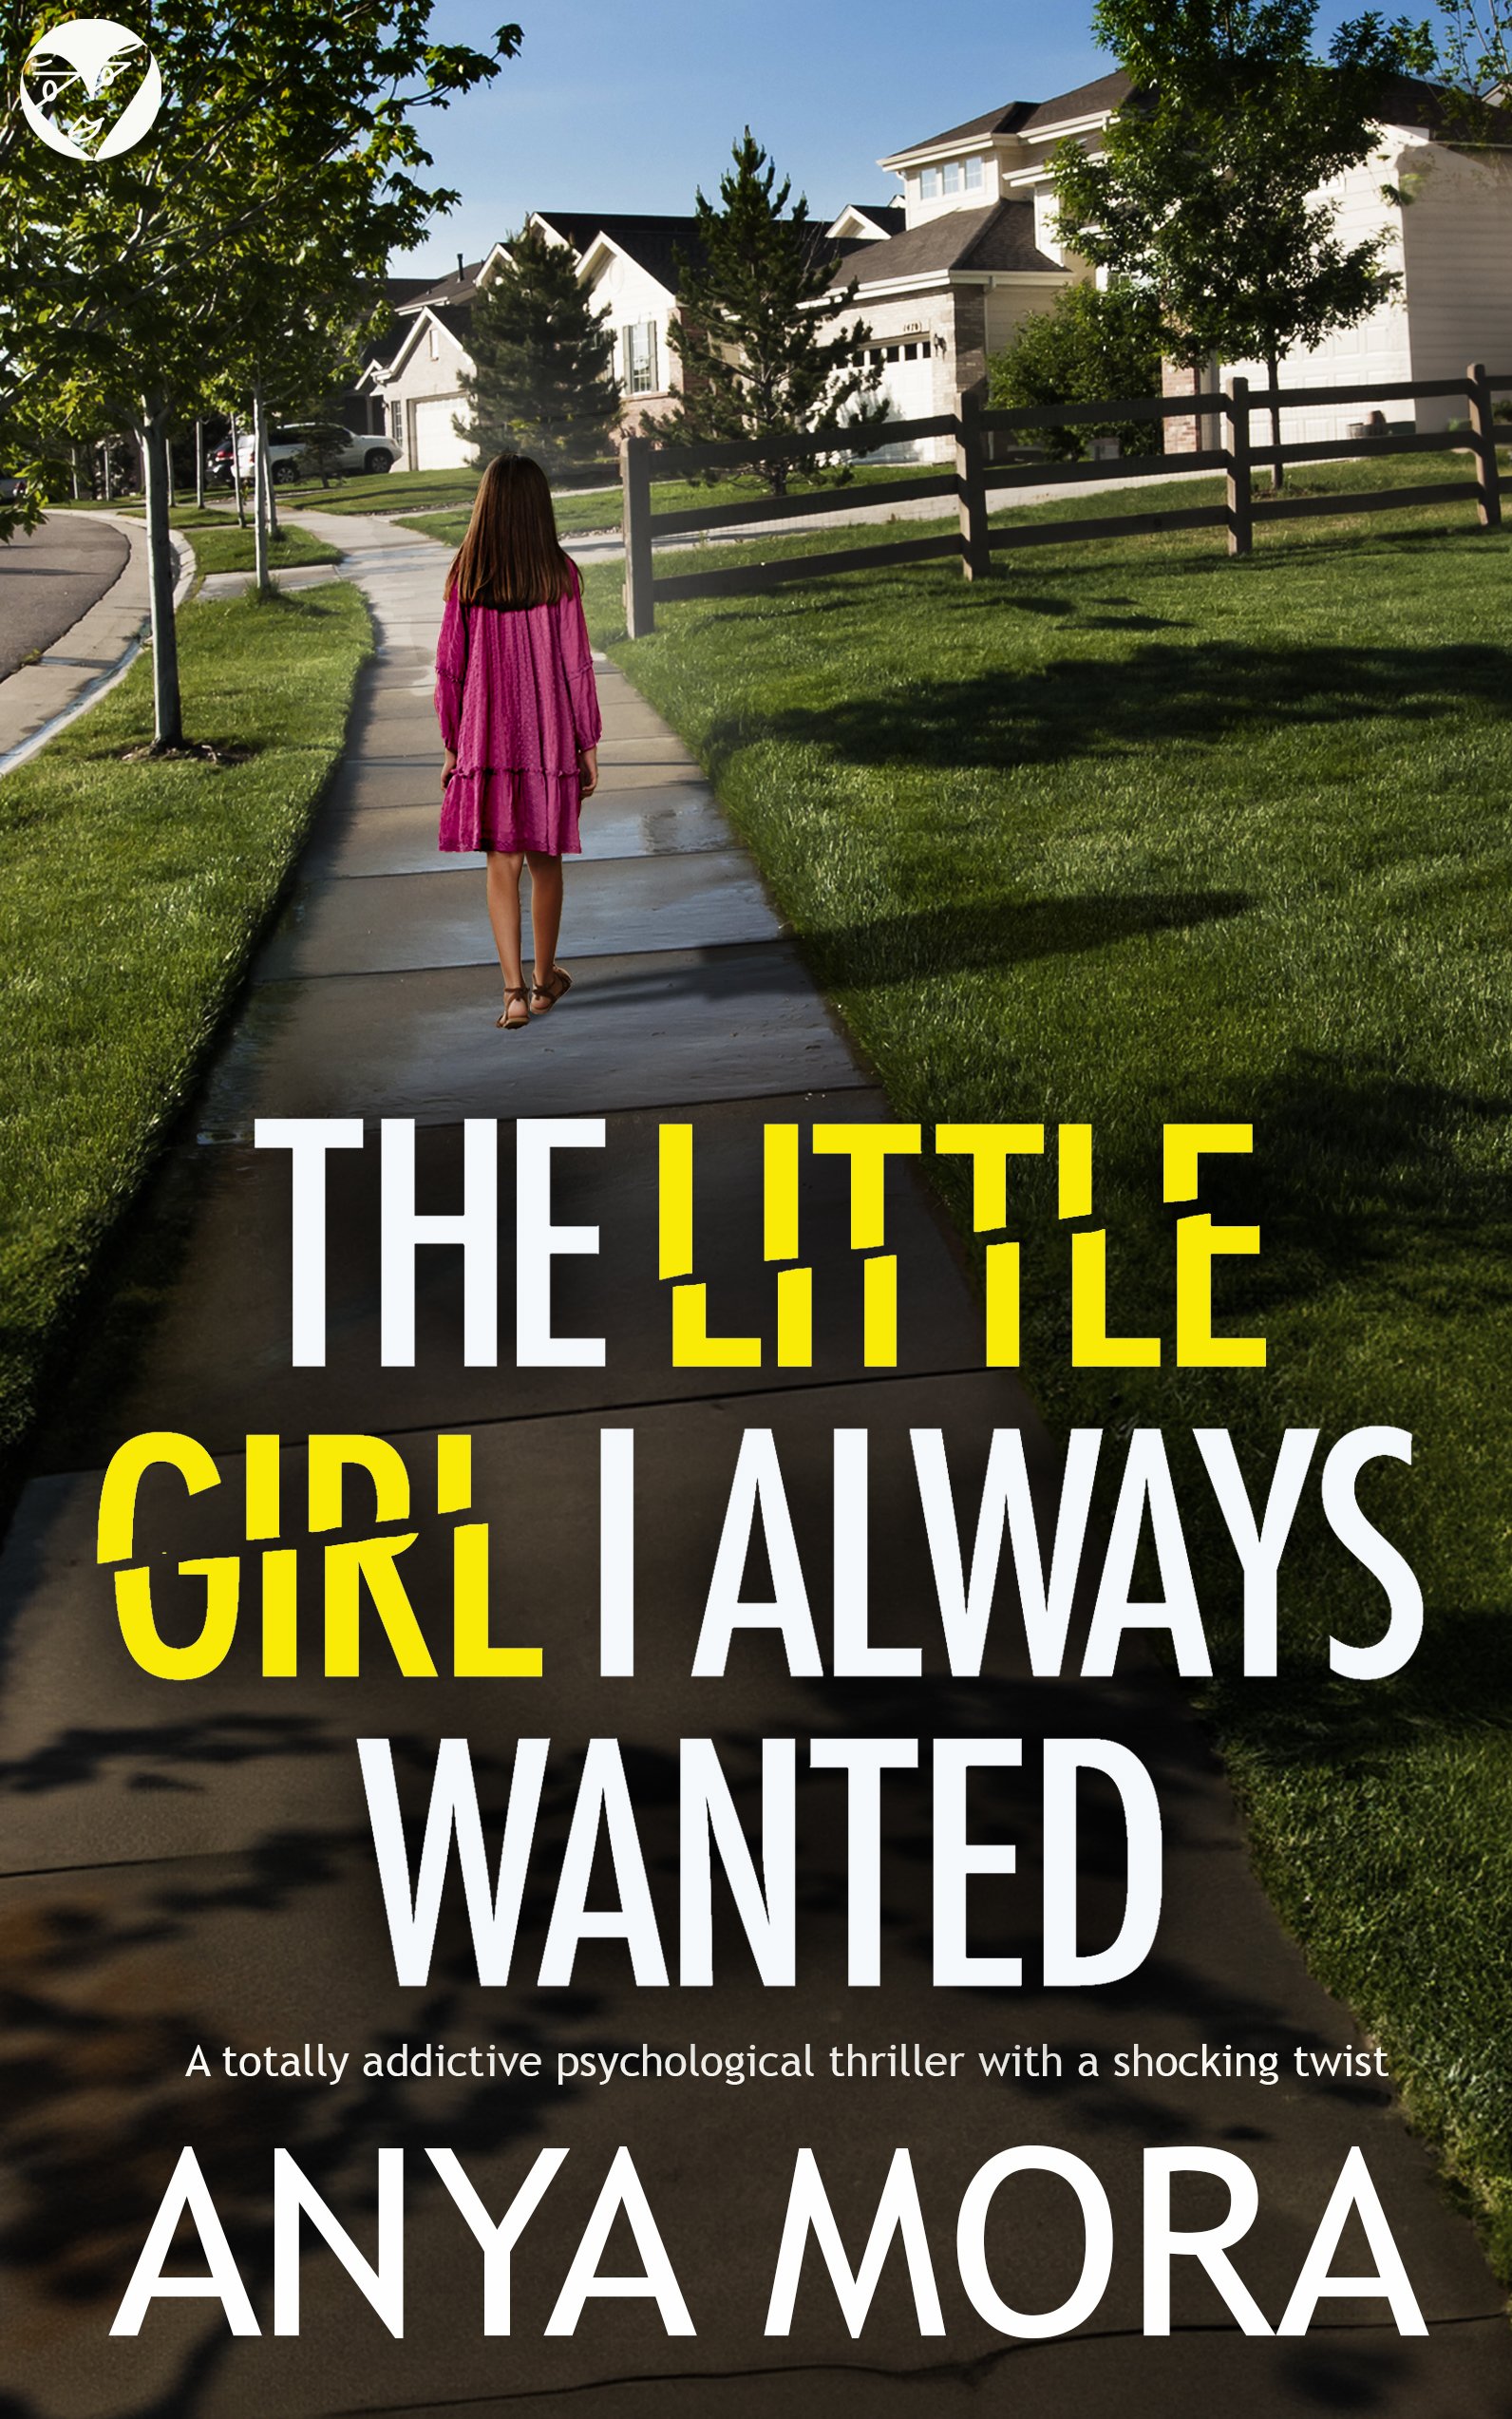 THE LITTLE GIRL I ALWAYS WANTED Cover publish.jpg